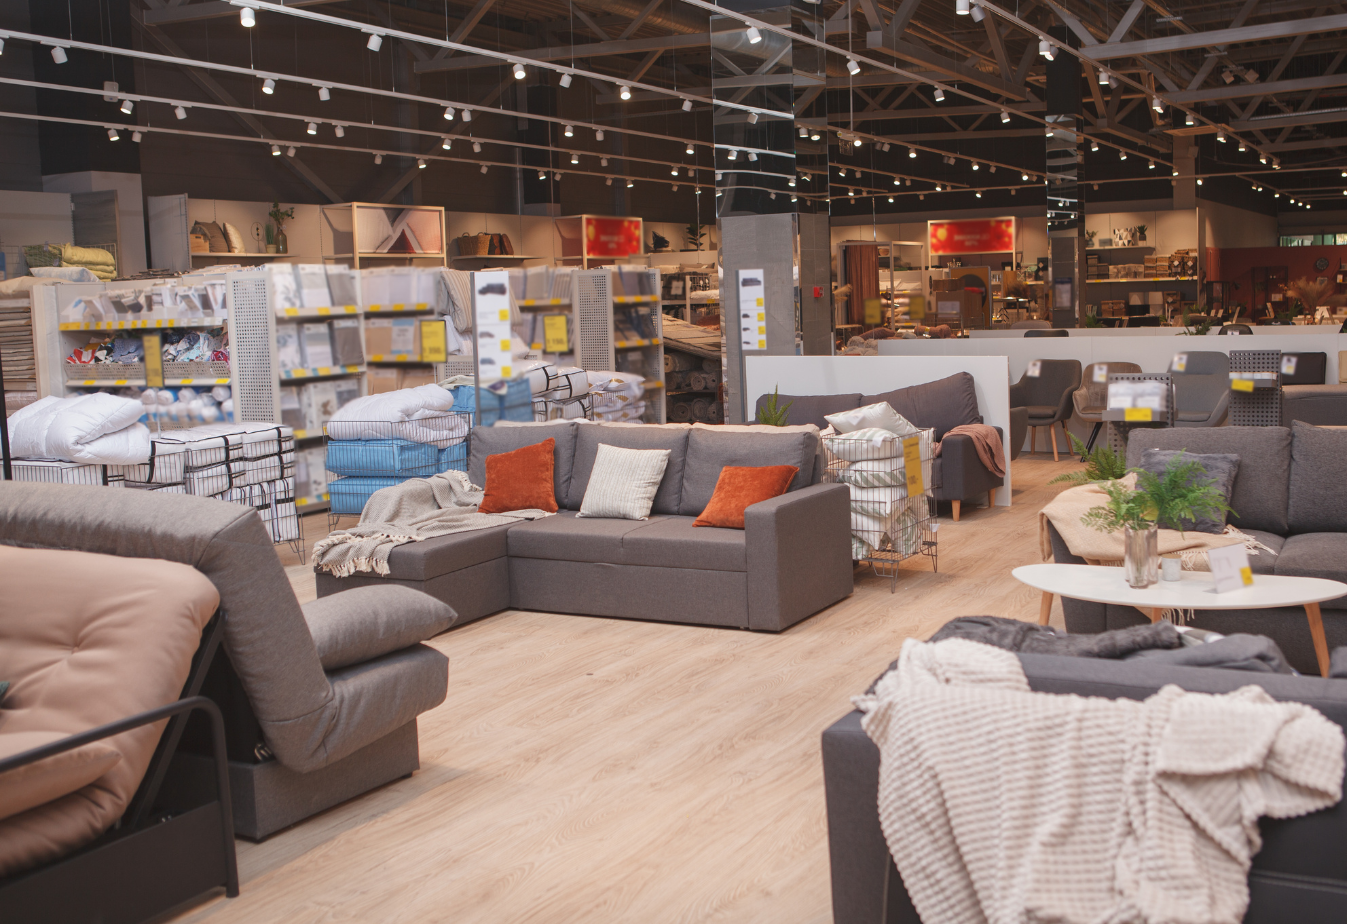 wide shot of a furniture and home goods store with grey couch in front of a show room